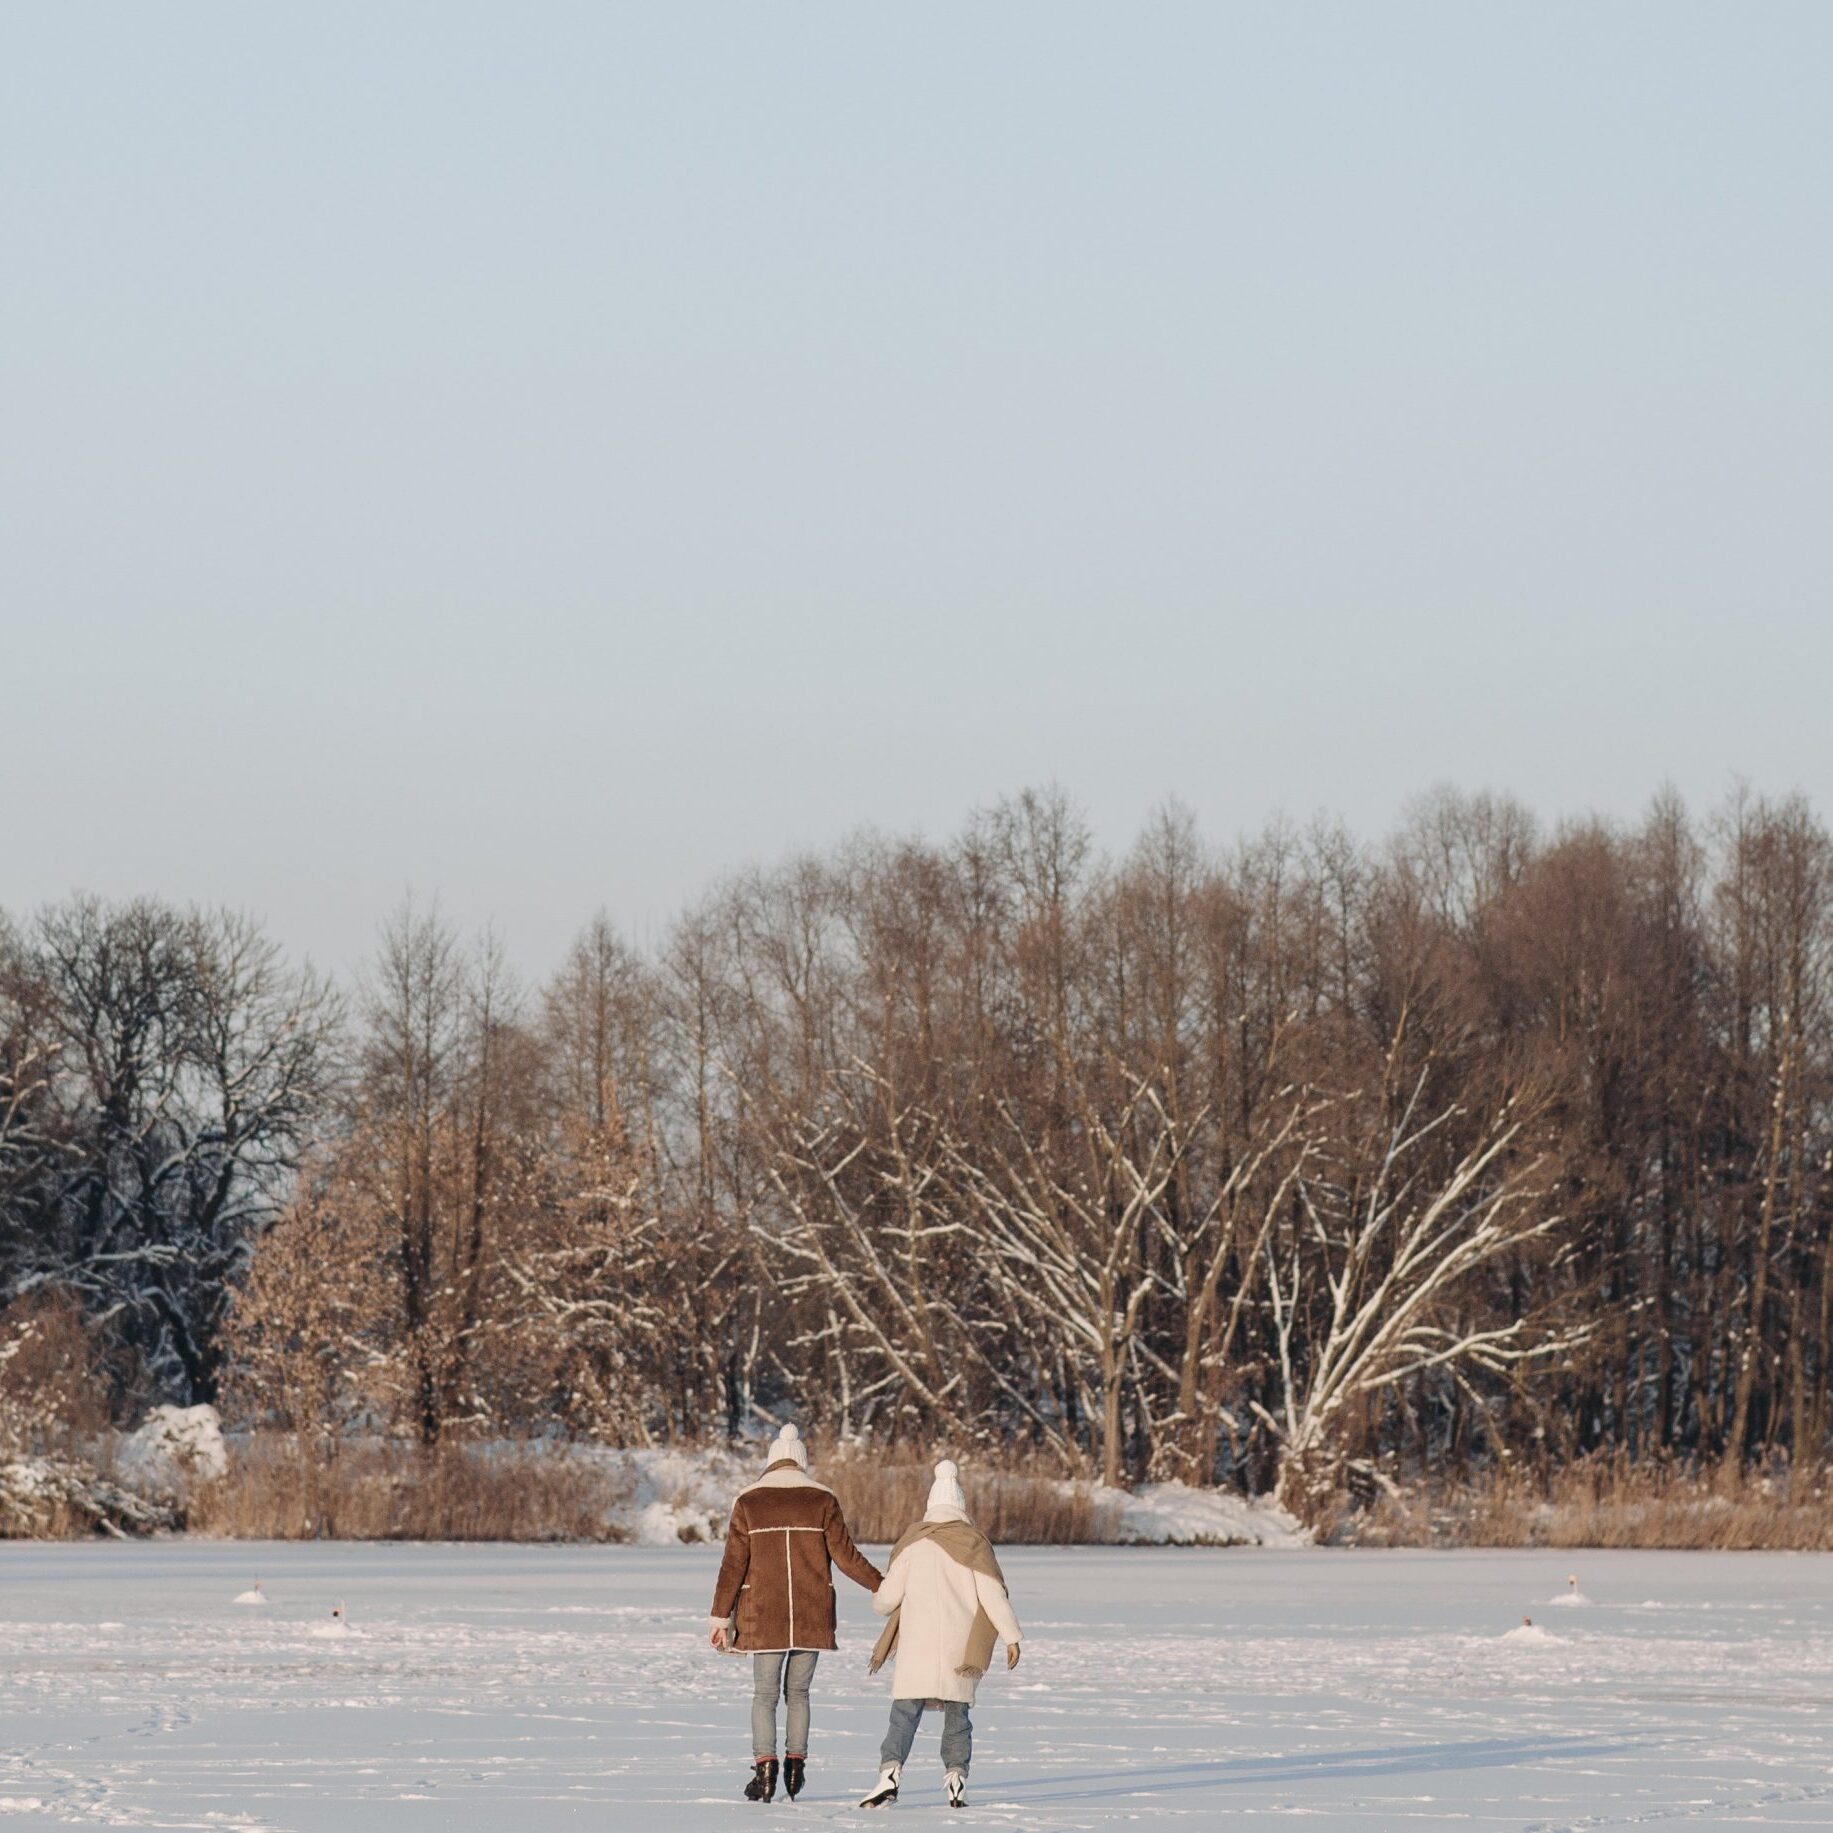 a photo of a frozen pond with two small figures ice-skating